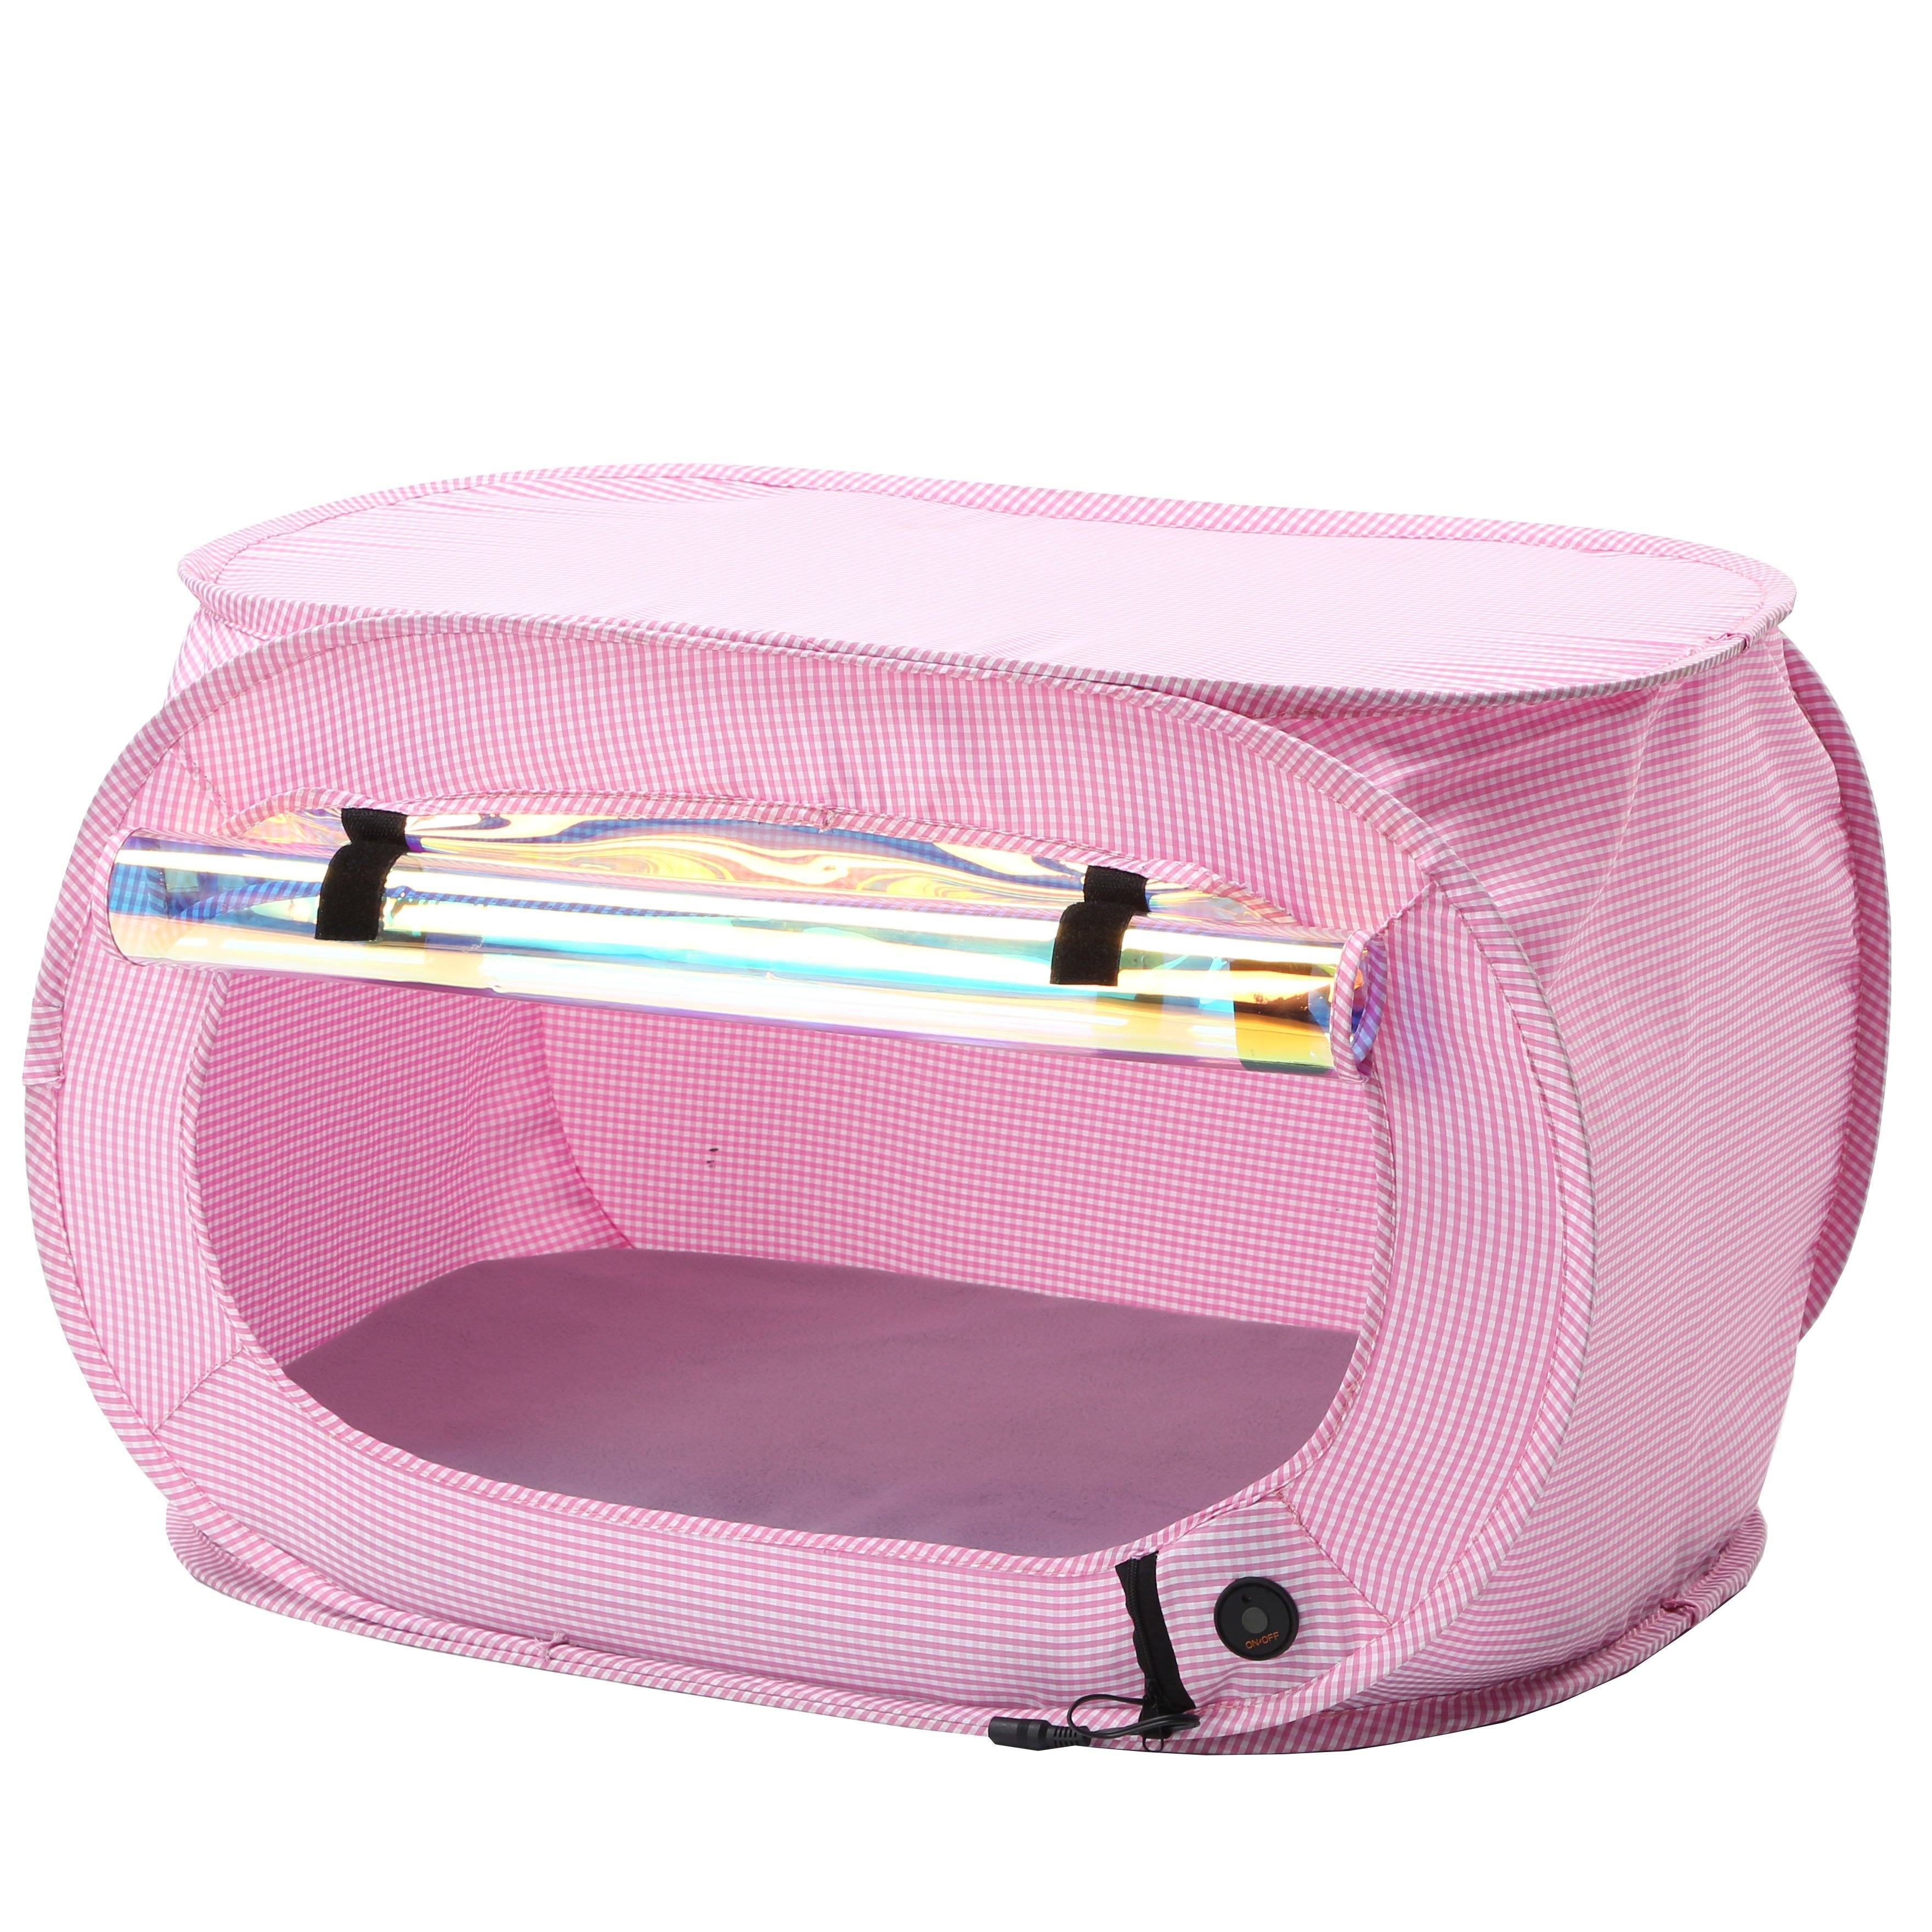 Pet Life "Enterlude" Electric Heating Wire Folding Travel Pet Tent Crate Pink 